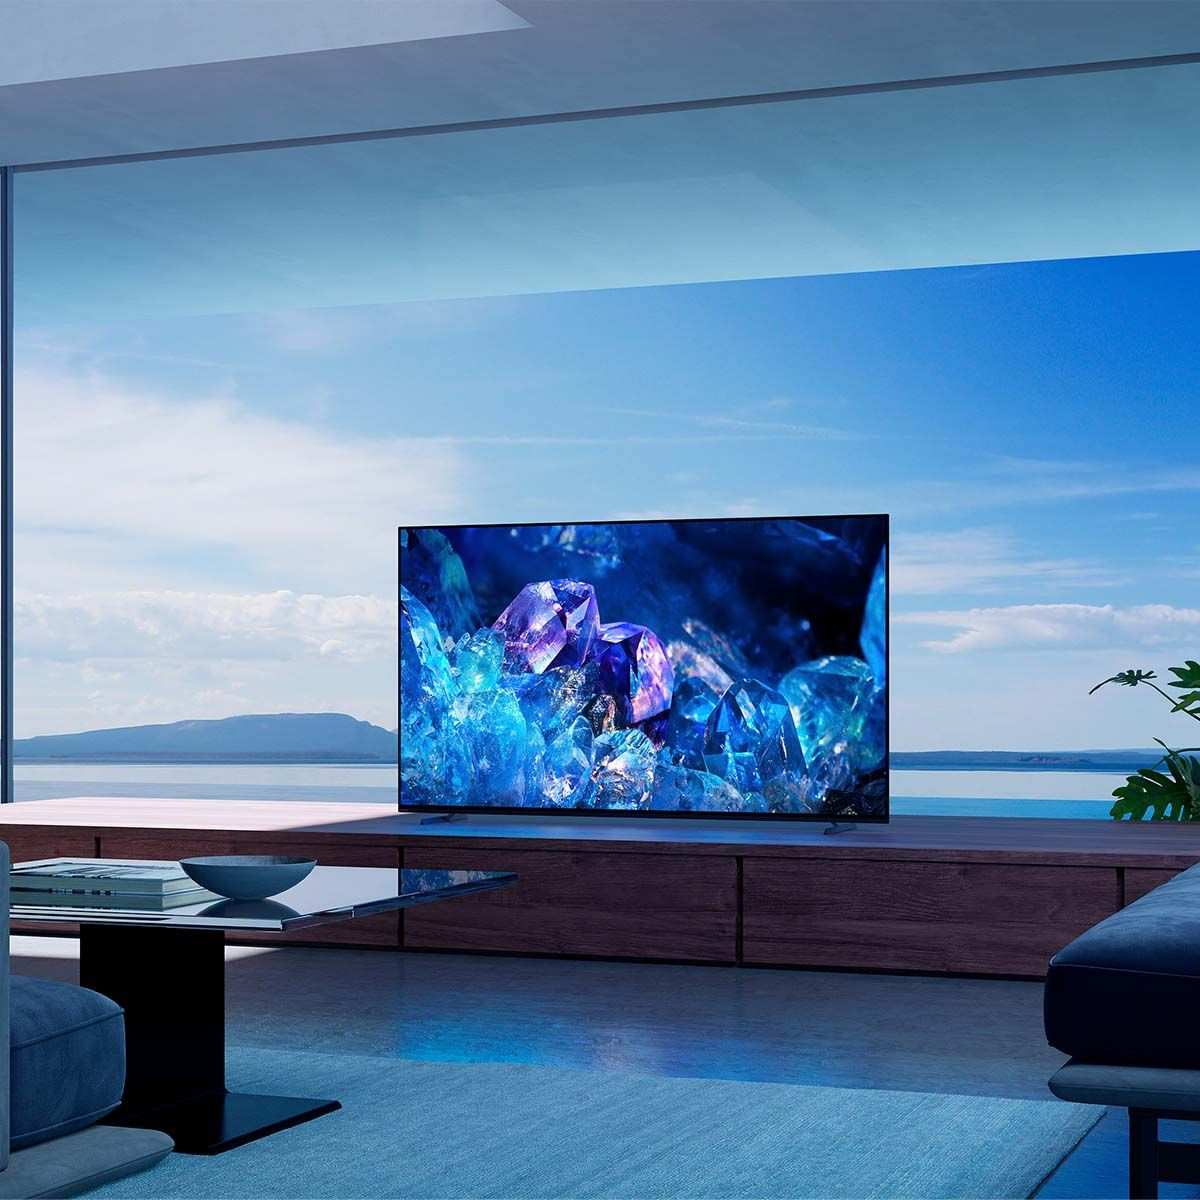 Sony BRAVIA XR A80K 4K HDR OLED Television, on a media stand in front of a large window with an aquatic view